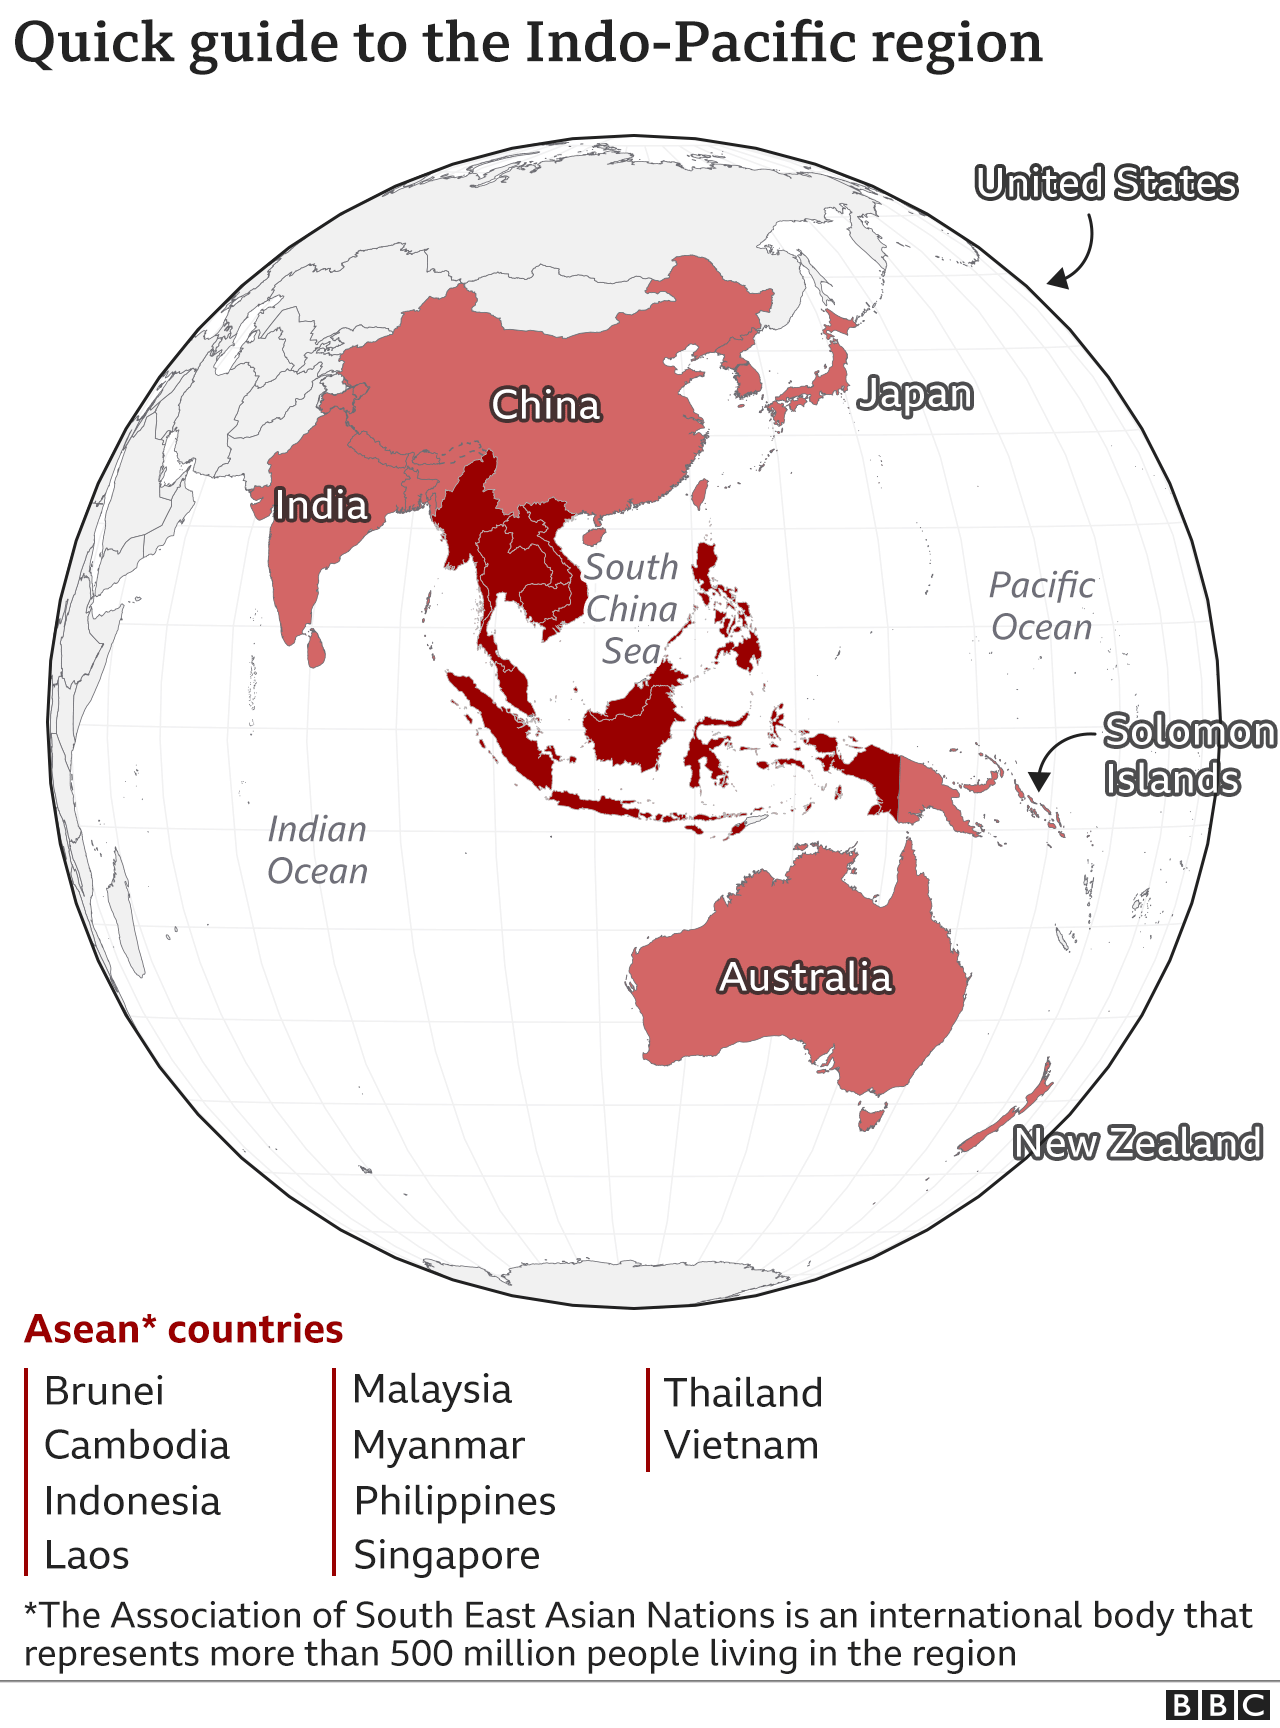 Map showing countries in the Indo-Pacific region